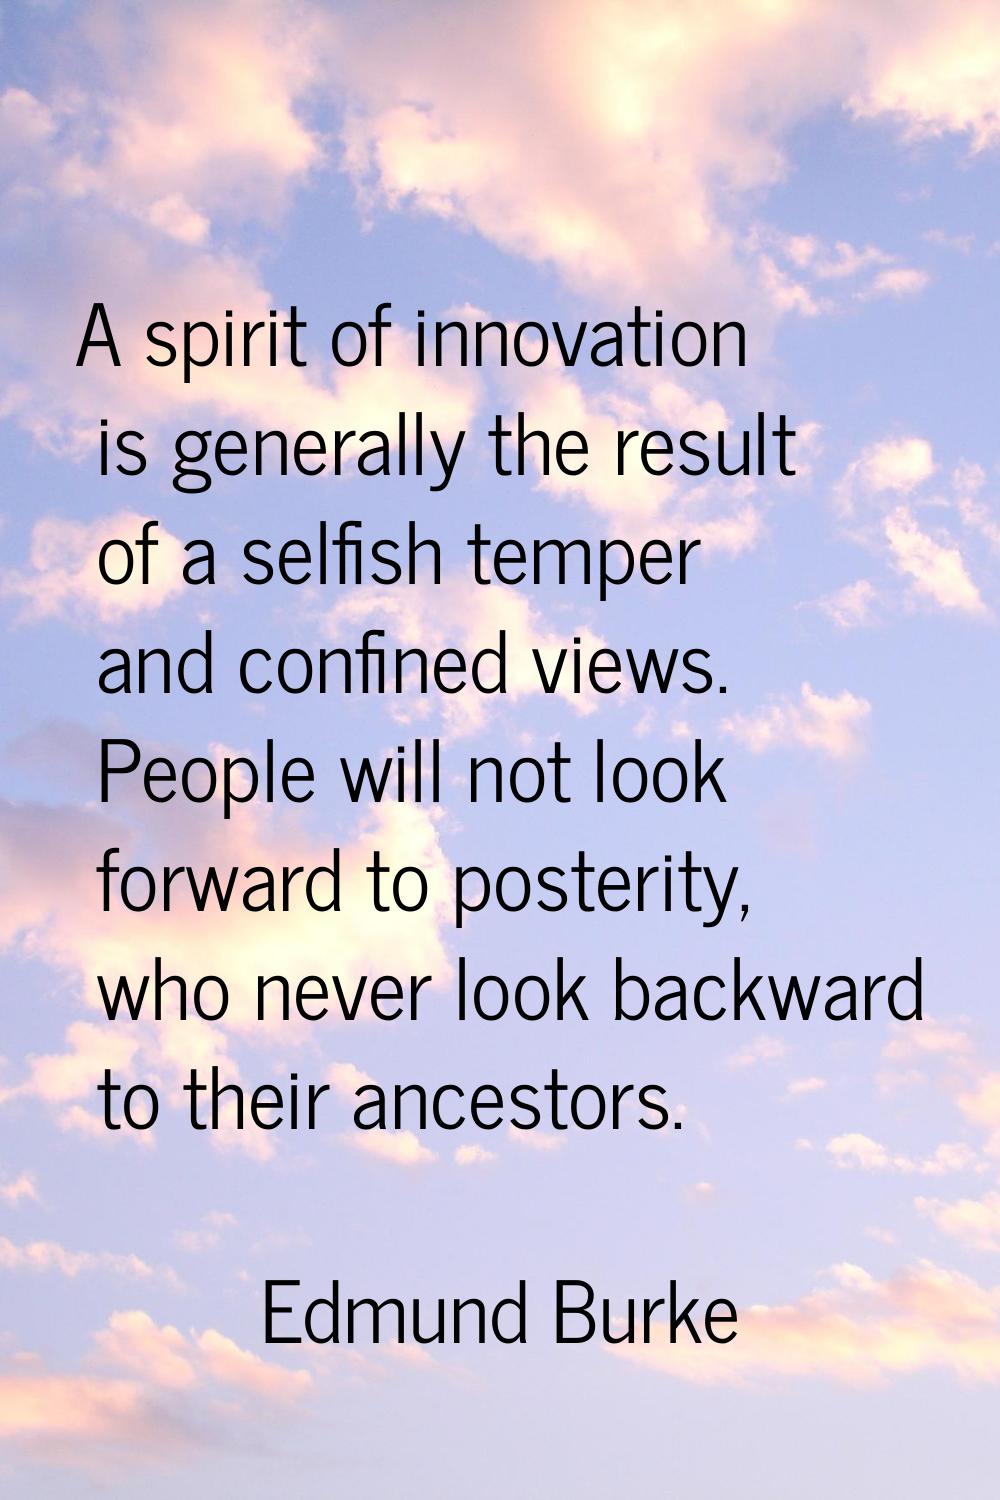 A spirit of innovation is generally the result of a selfish temper and confined views. People will 